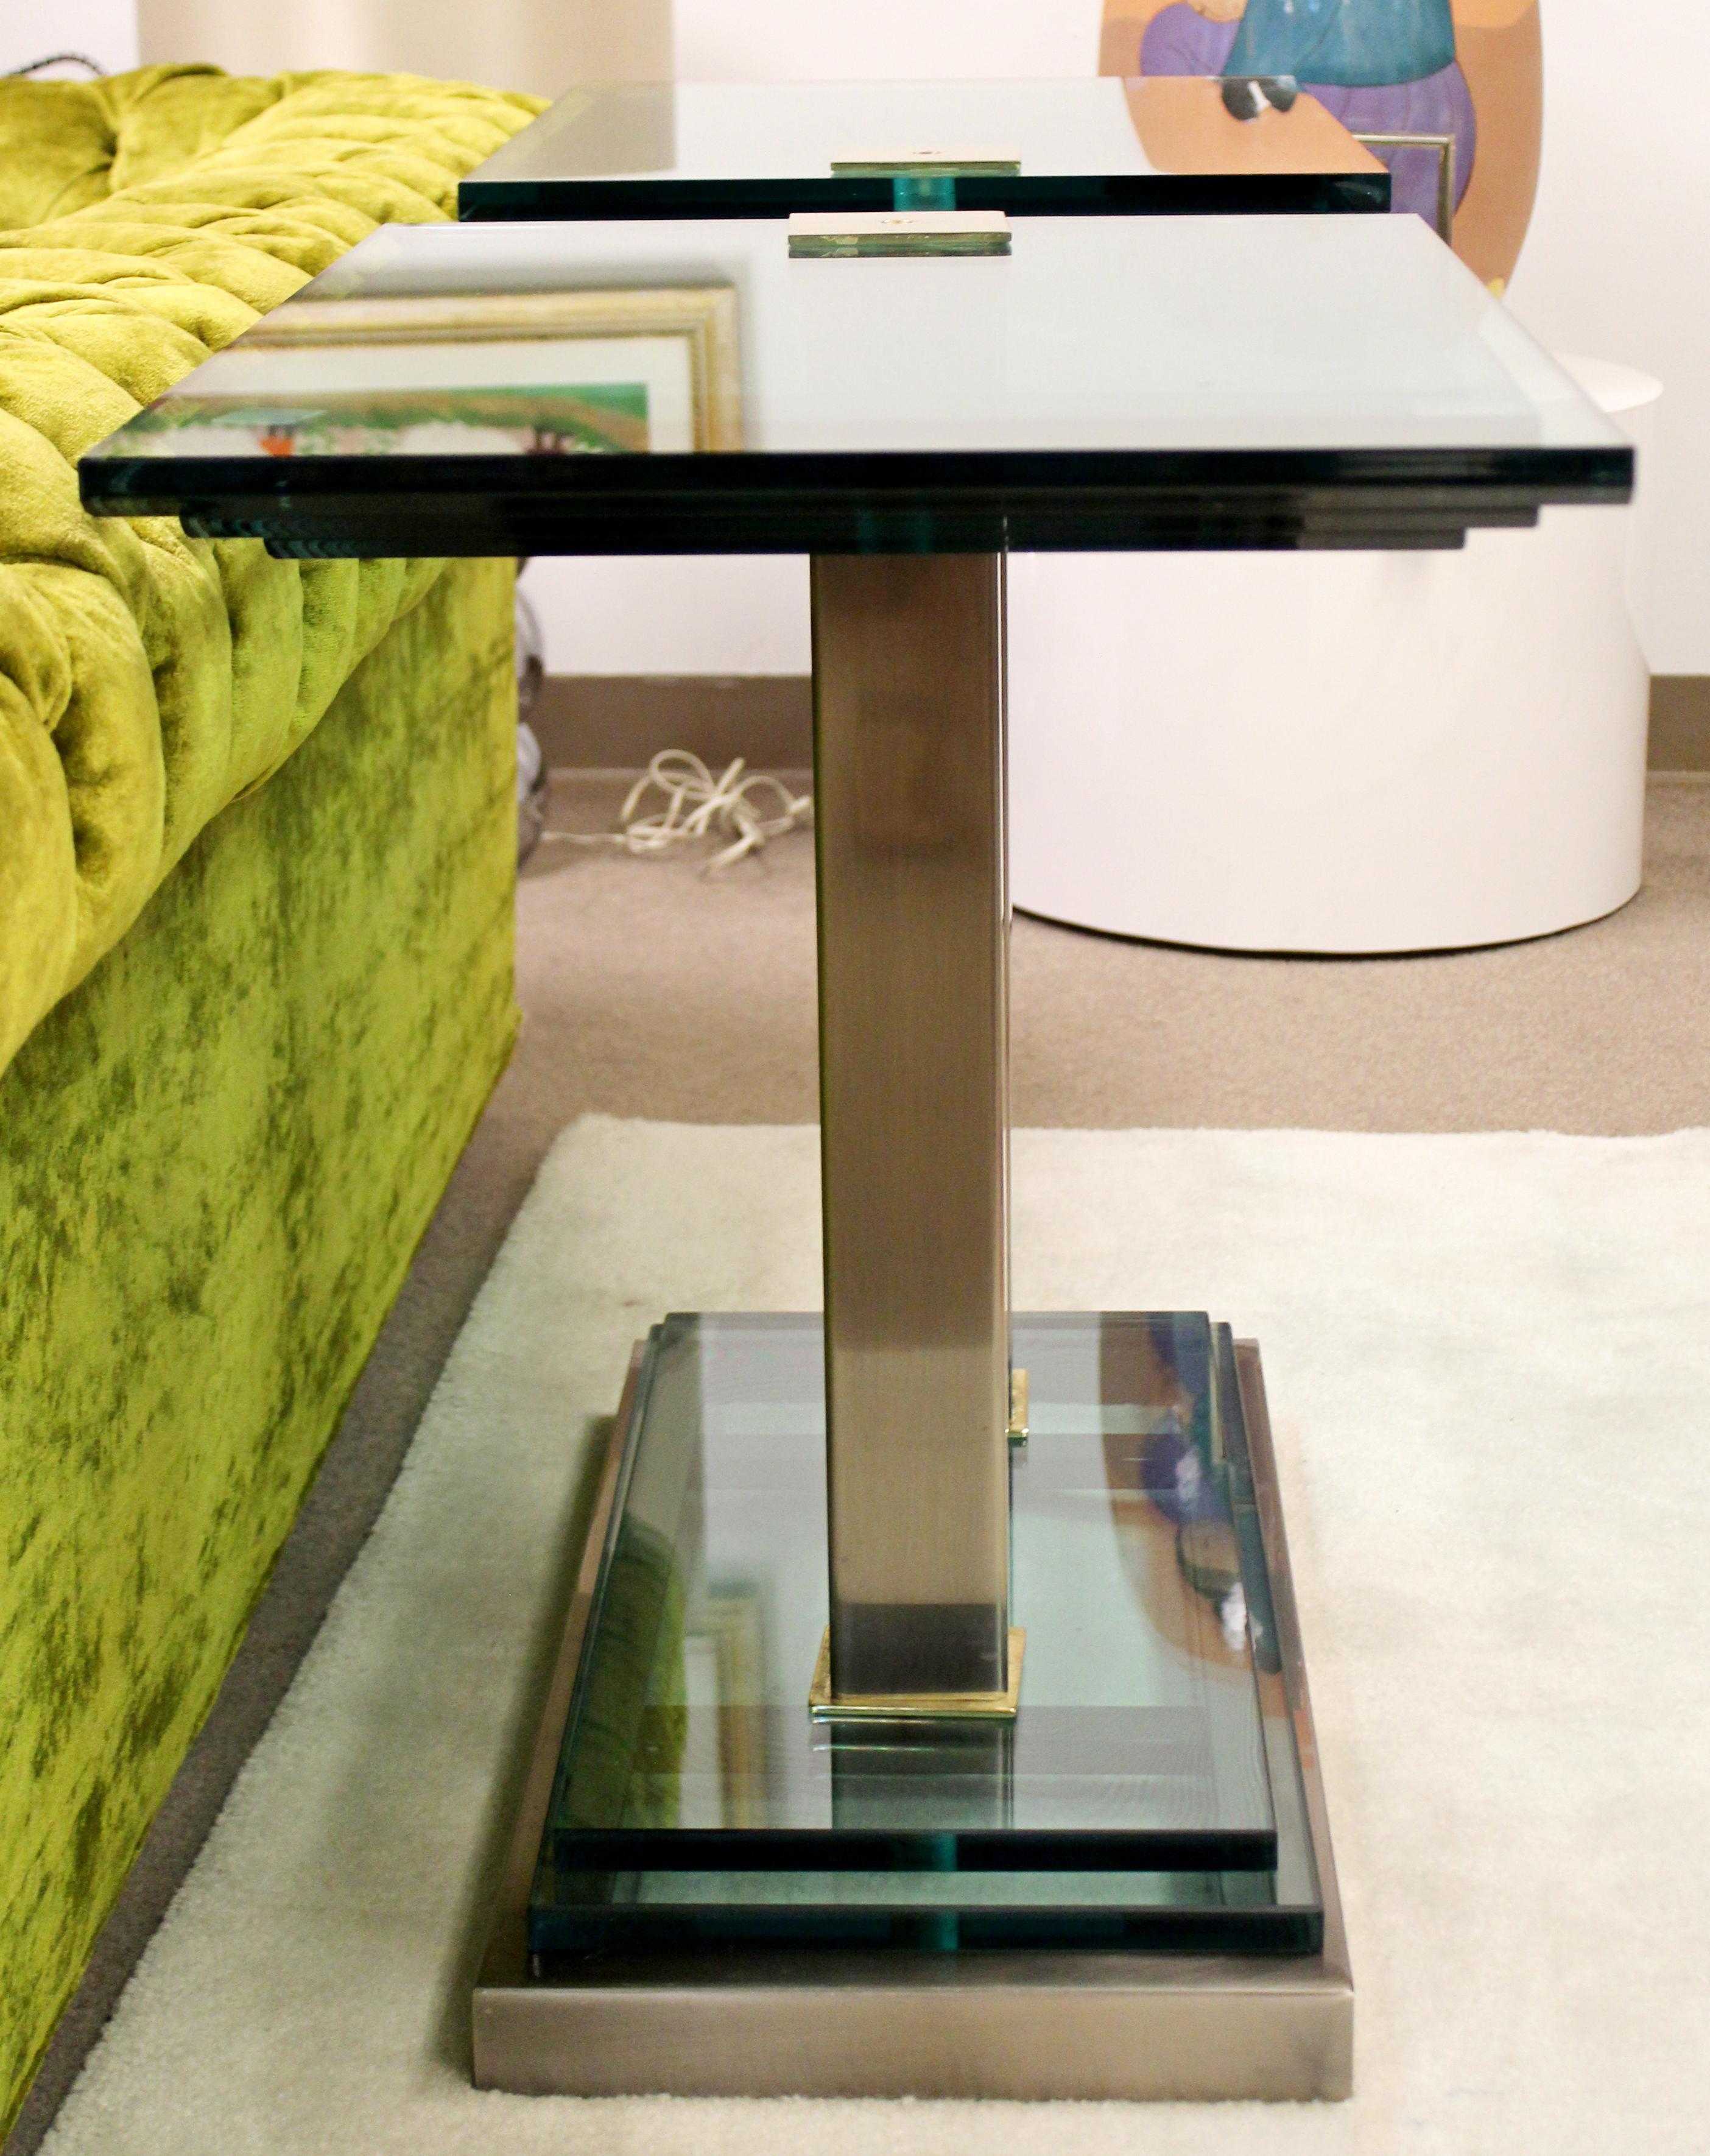 Late 20th Century Art Deco Style Console Table Brass Glass Chrome Steel by DIA Design Institute